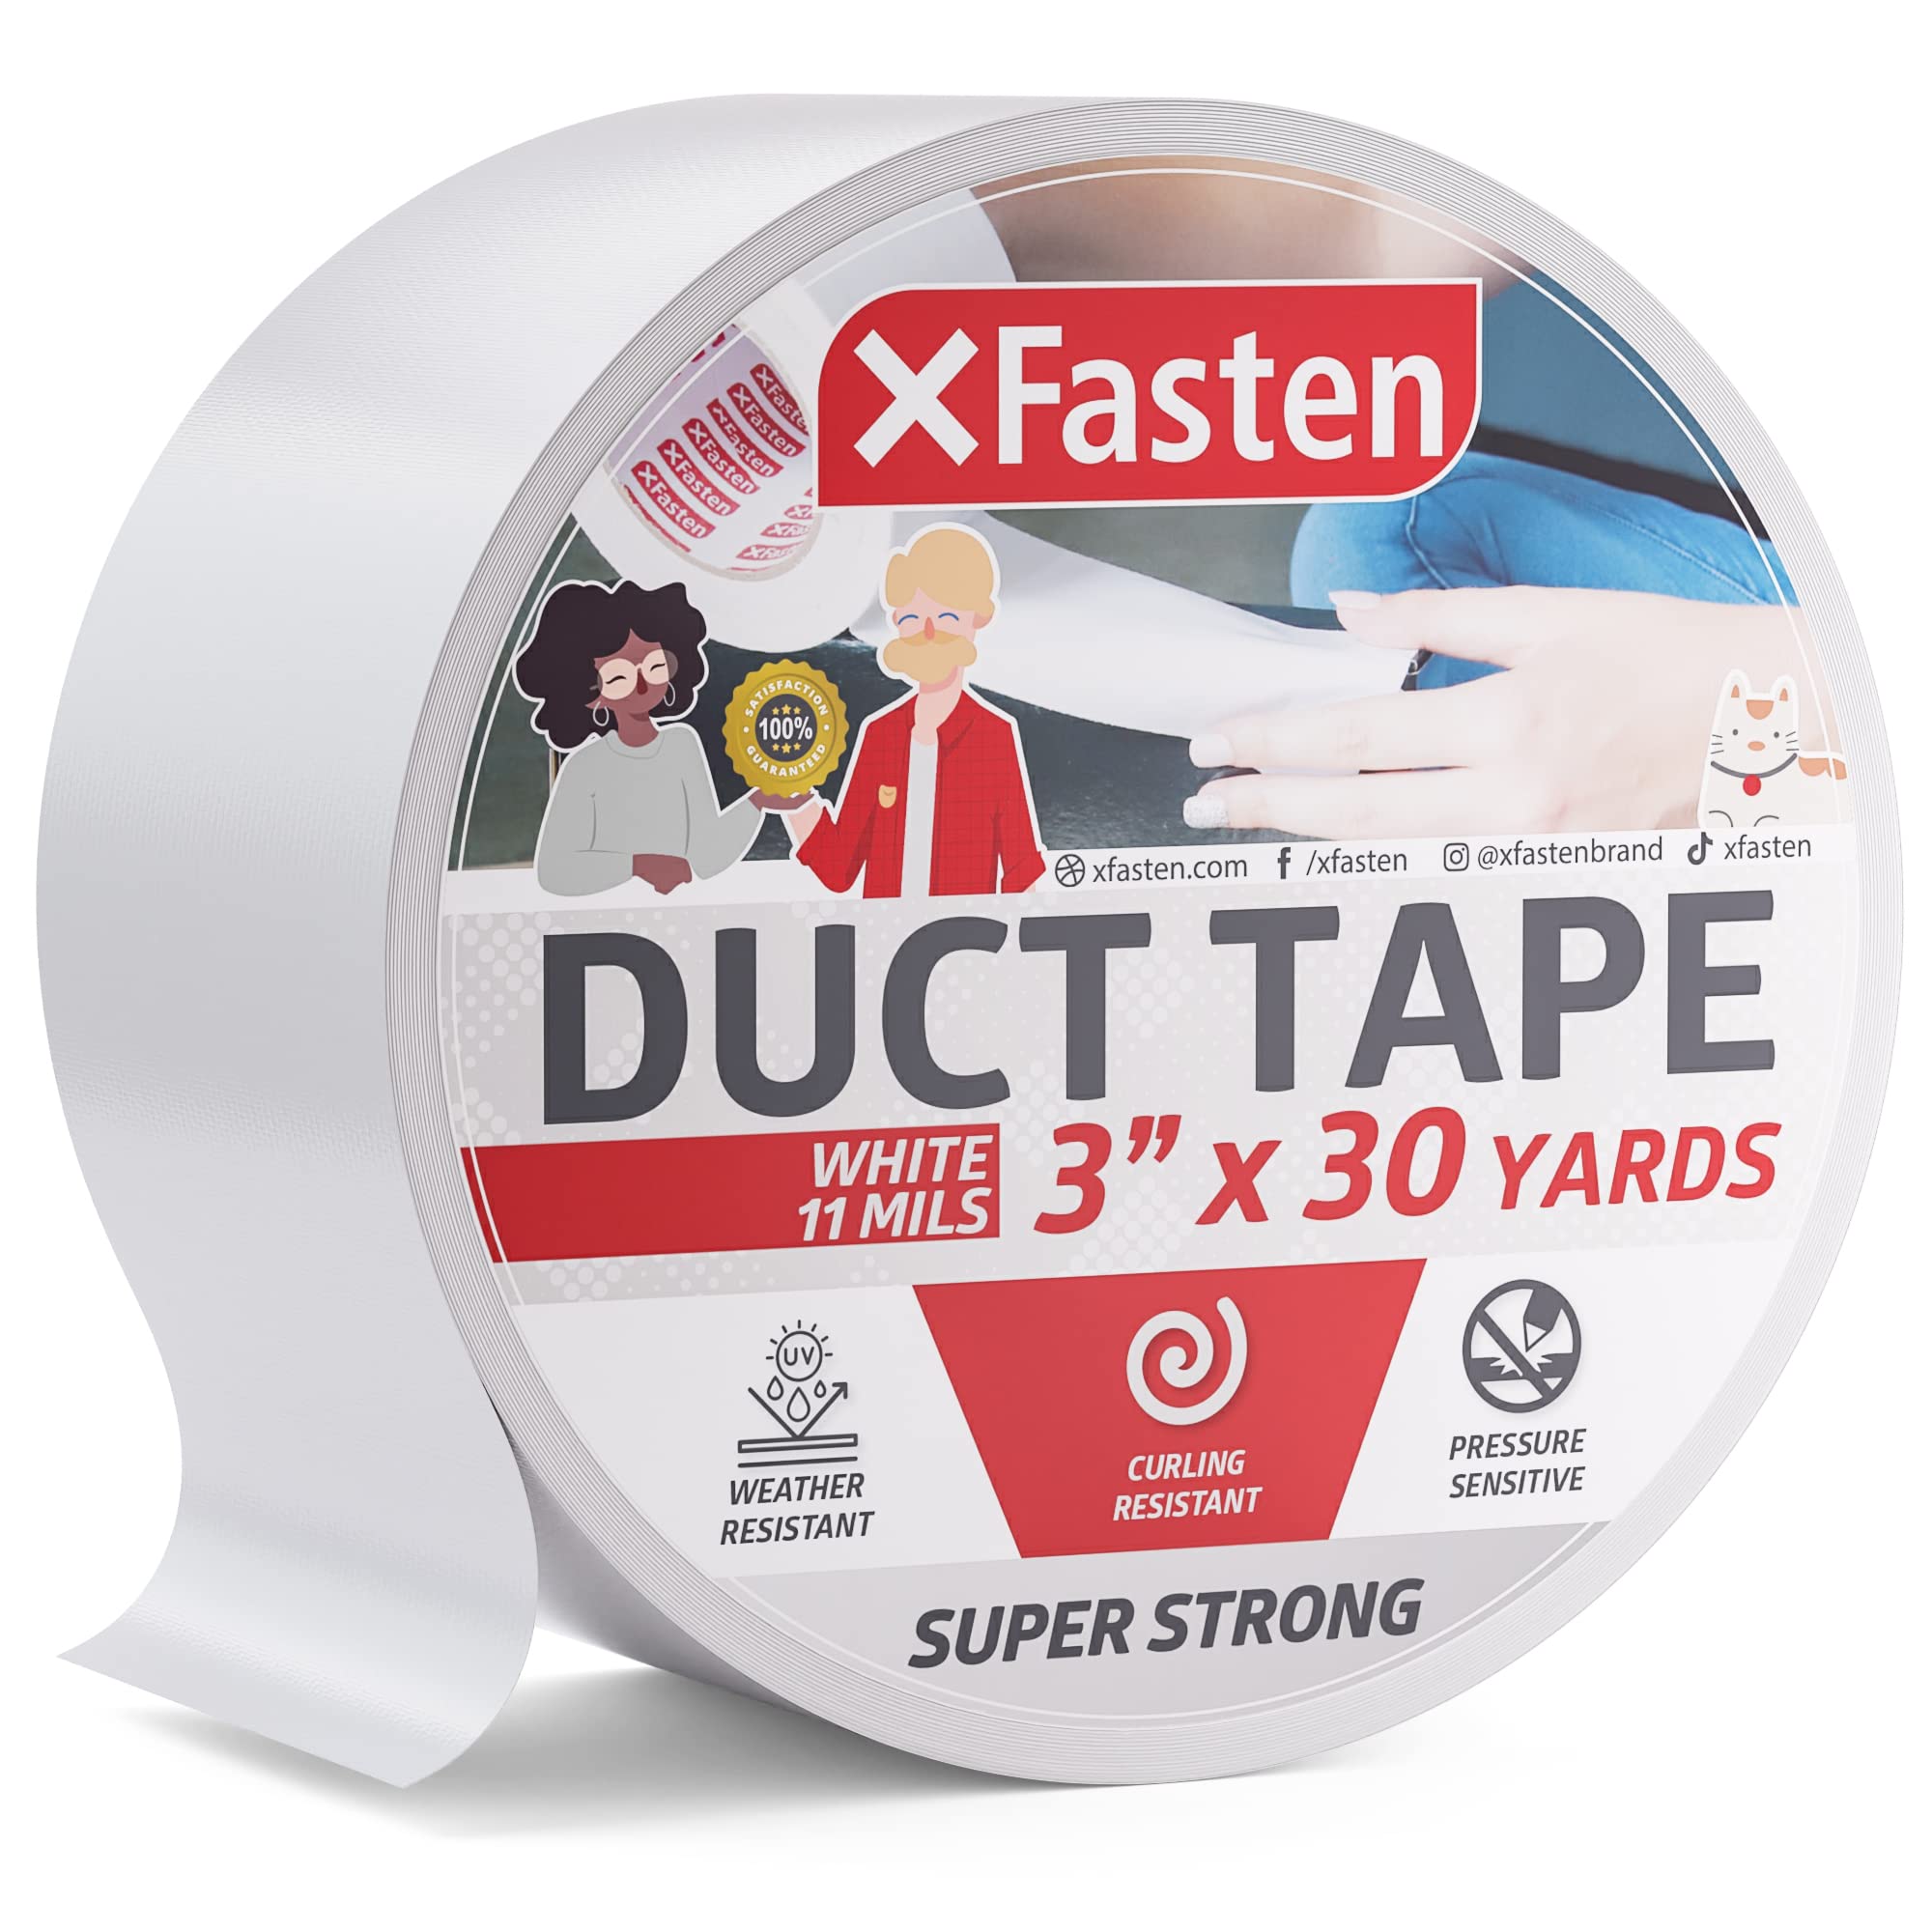 XFasten Tear-By-Hand Double Sided Tape, 2-Inch by 30-Yard, Easy Tear for DIY Crafts, Woodworking and Carpet Installation